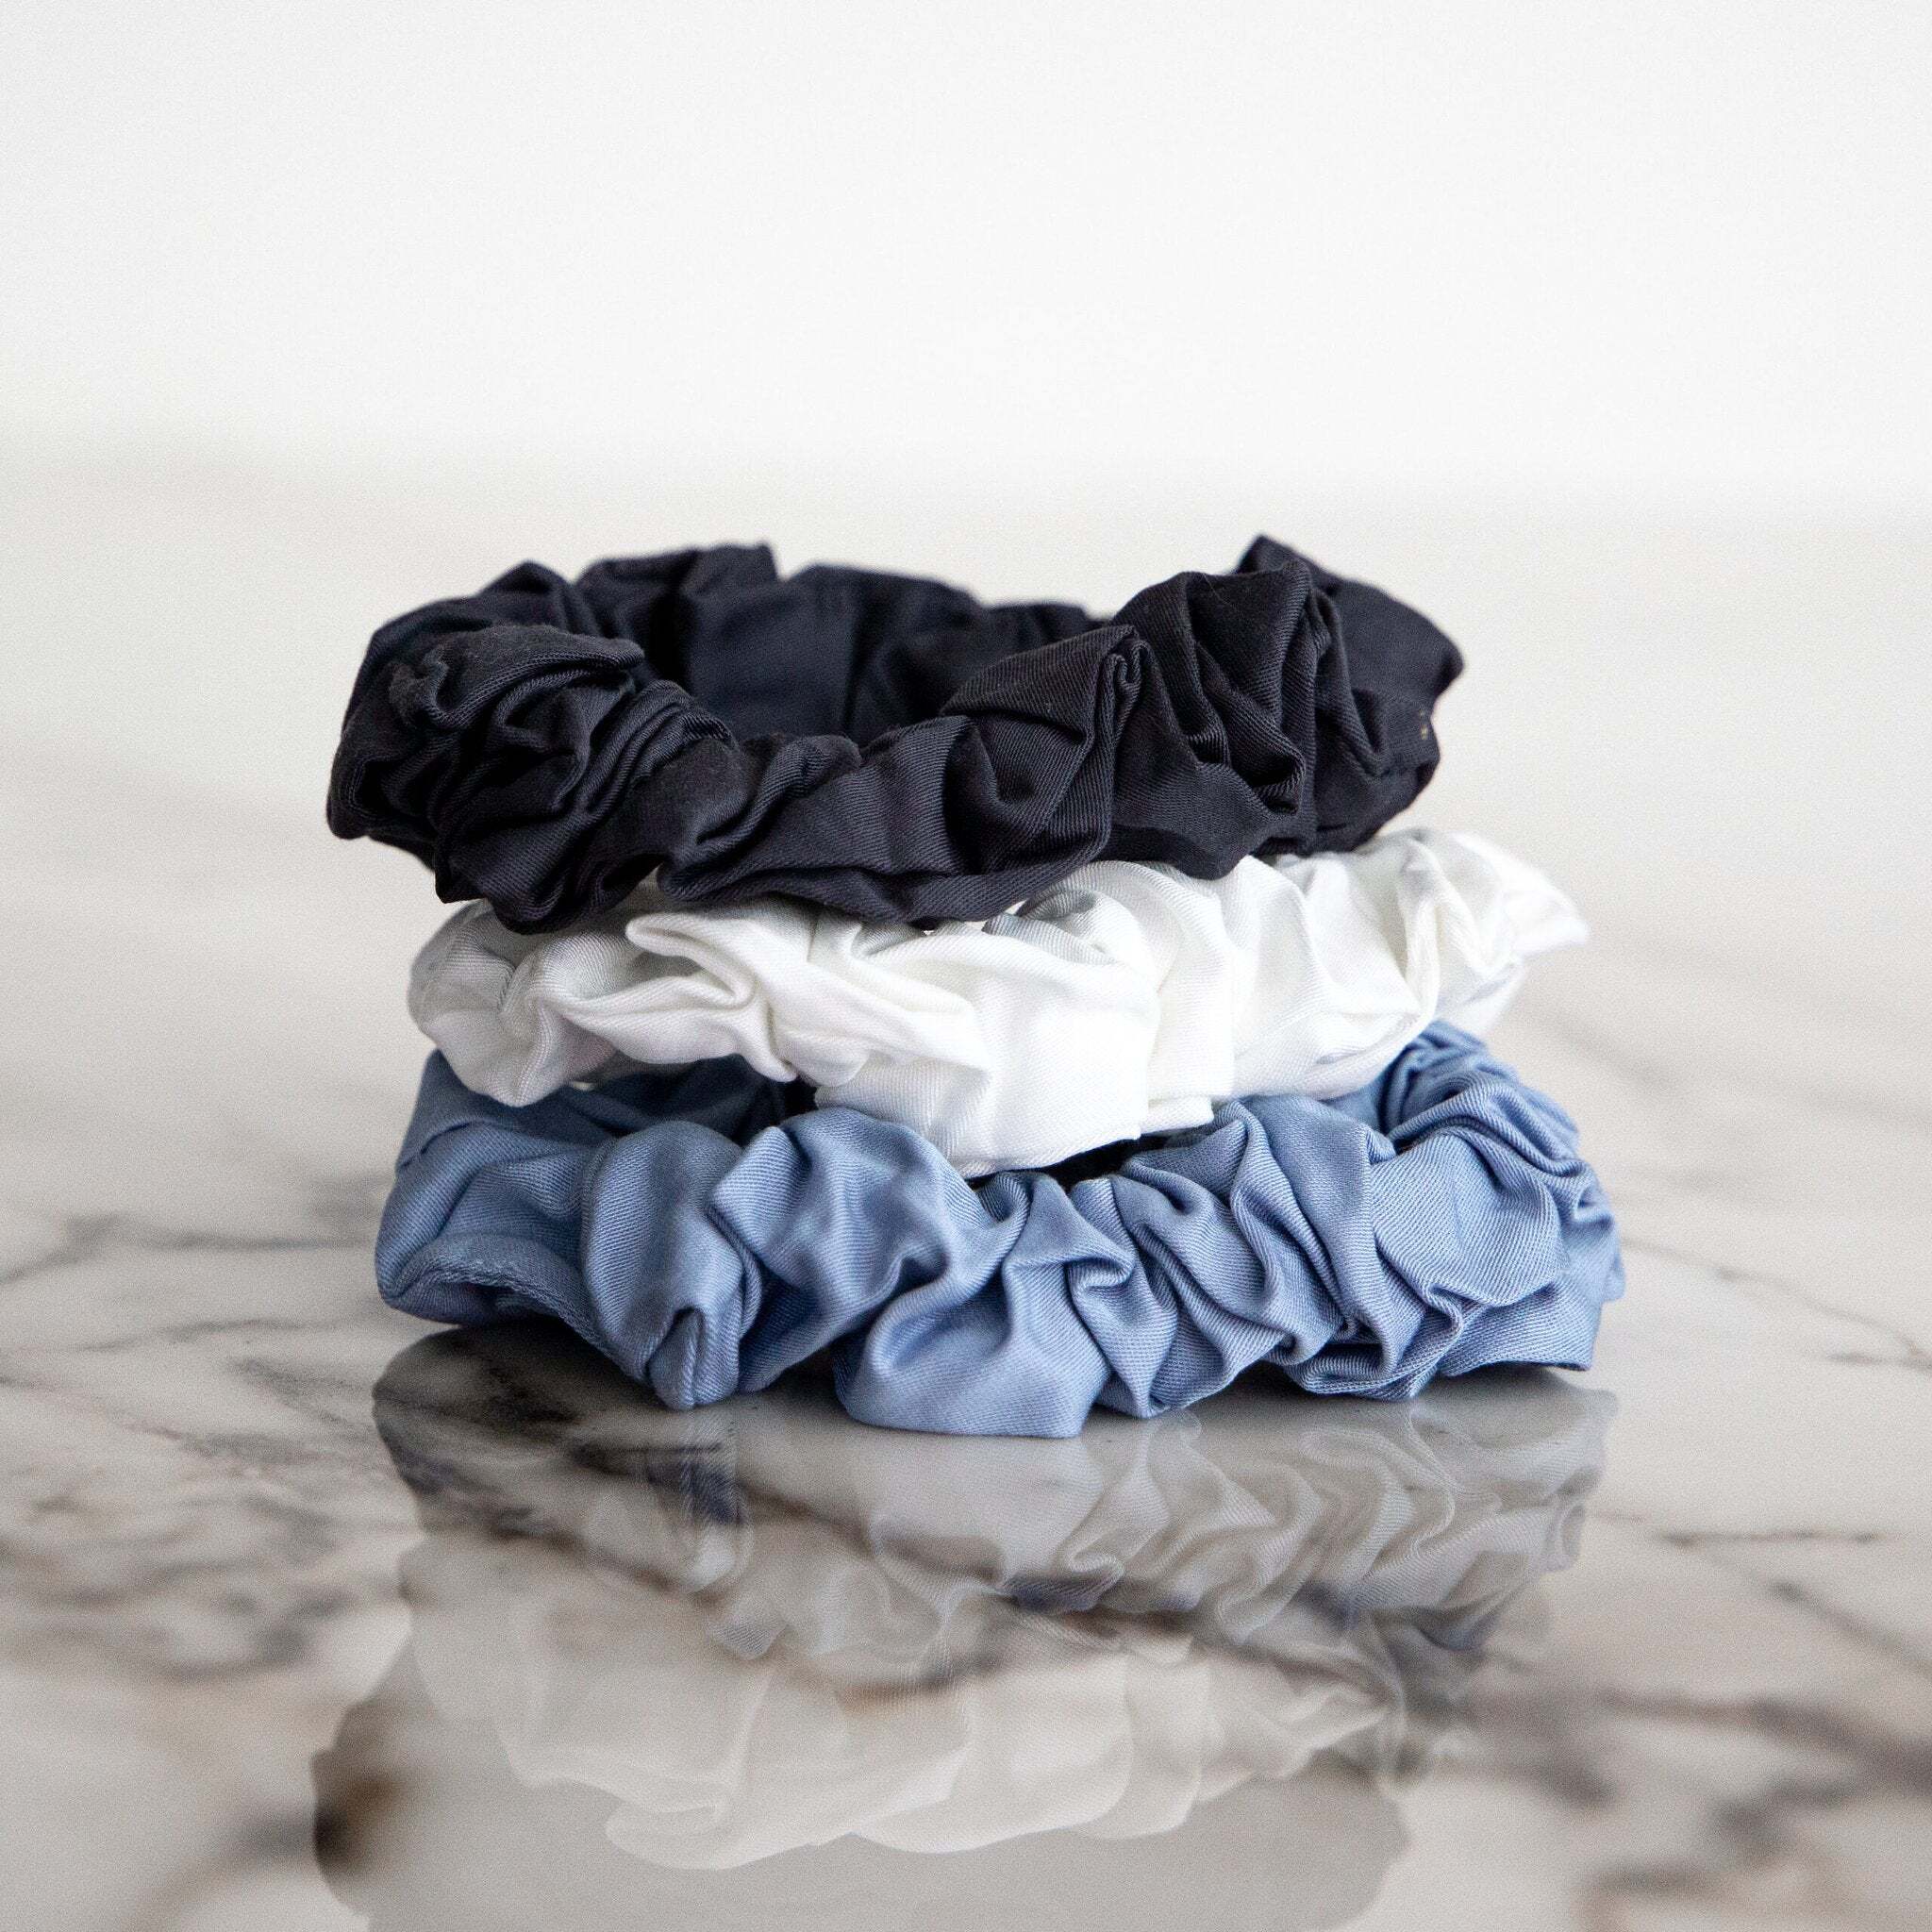 bamboo stories bamboo stories - scrunchies groot - blue, white and grey